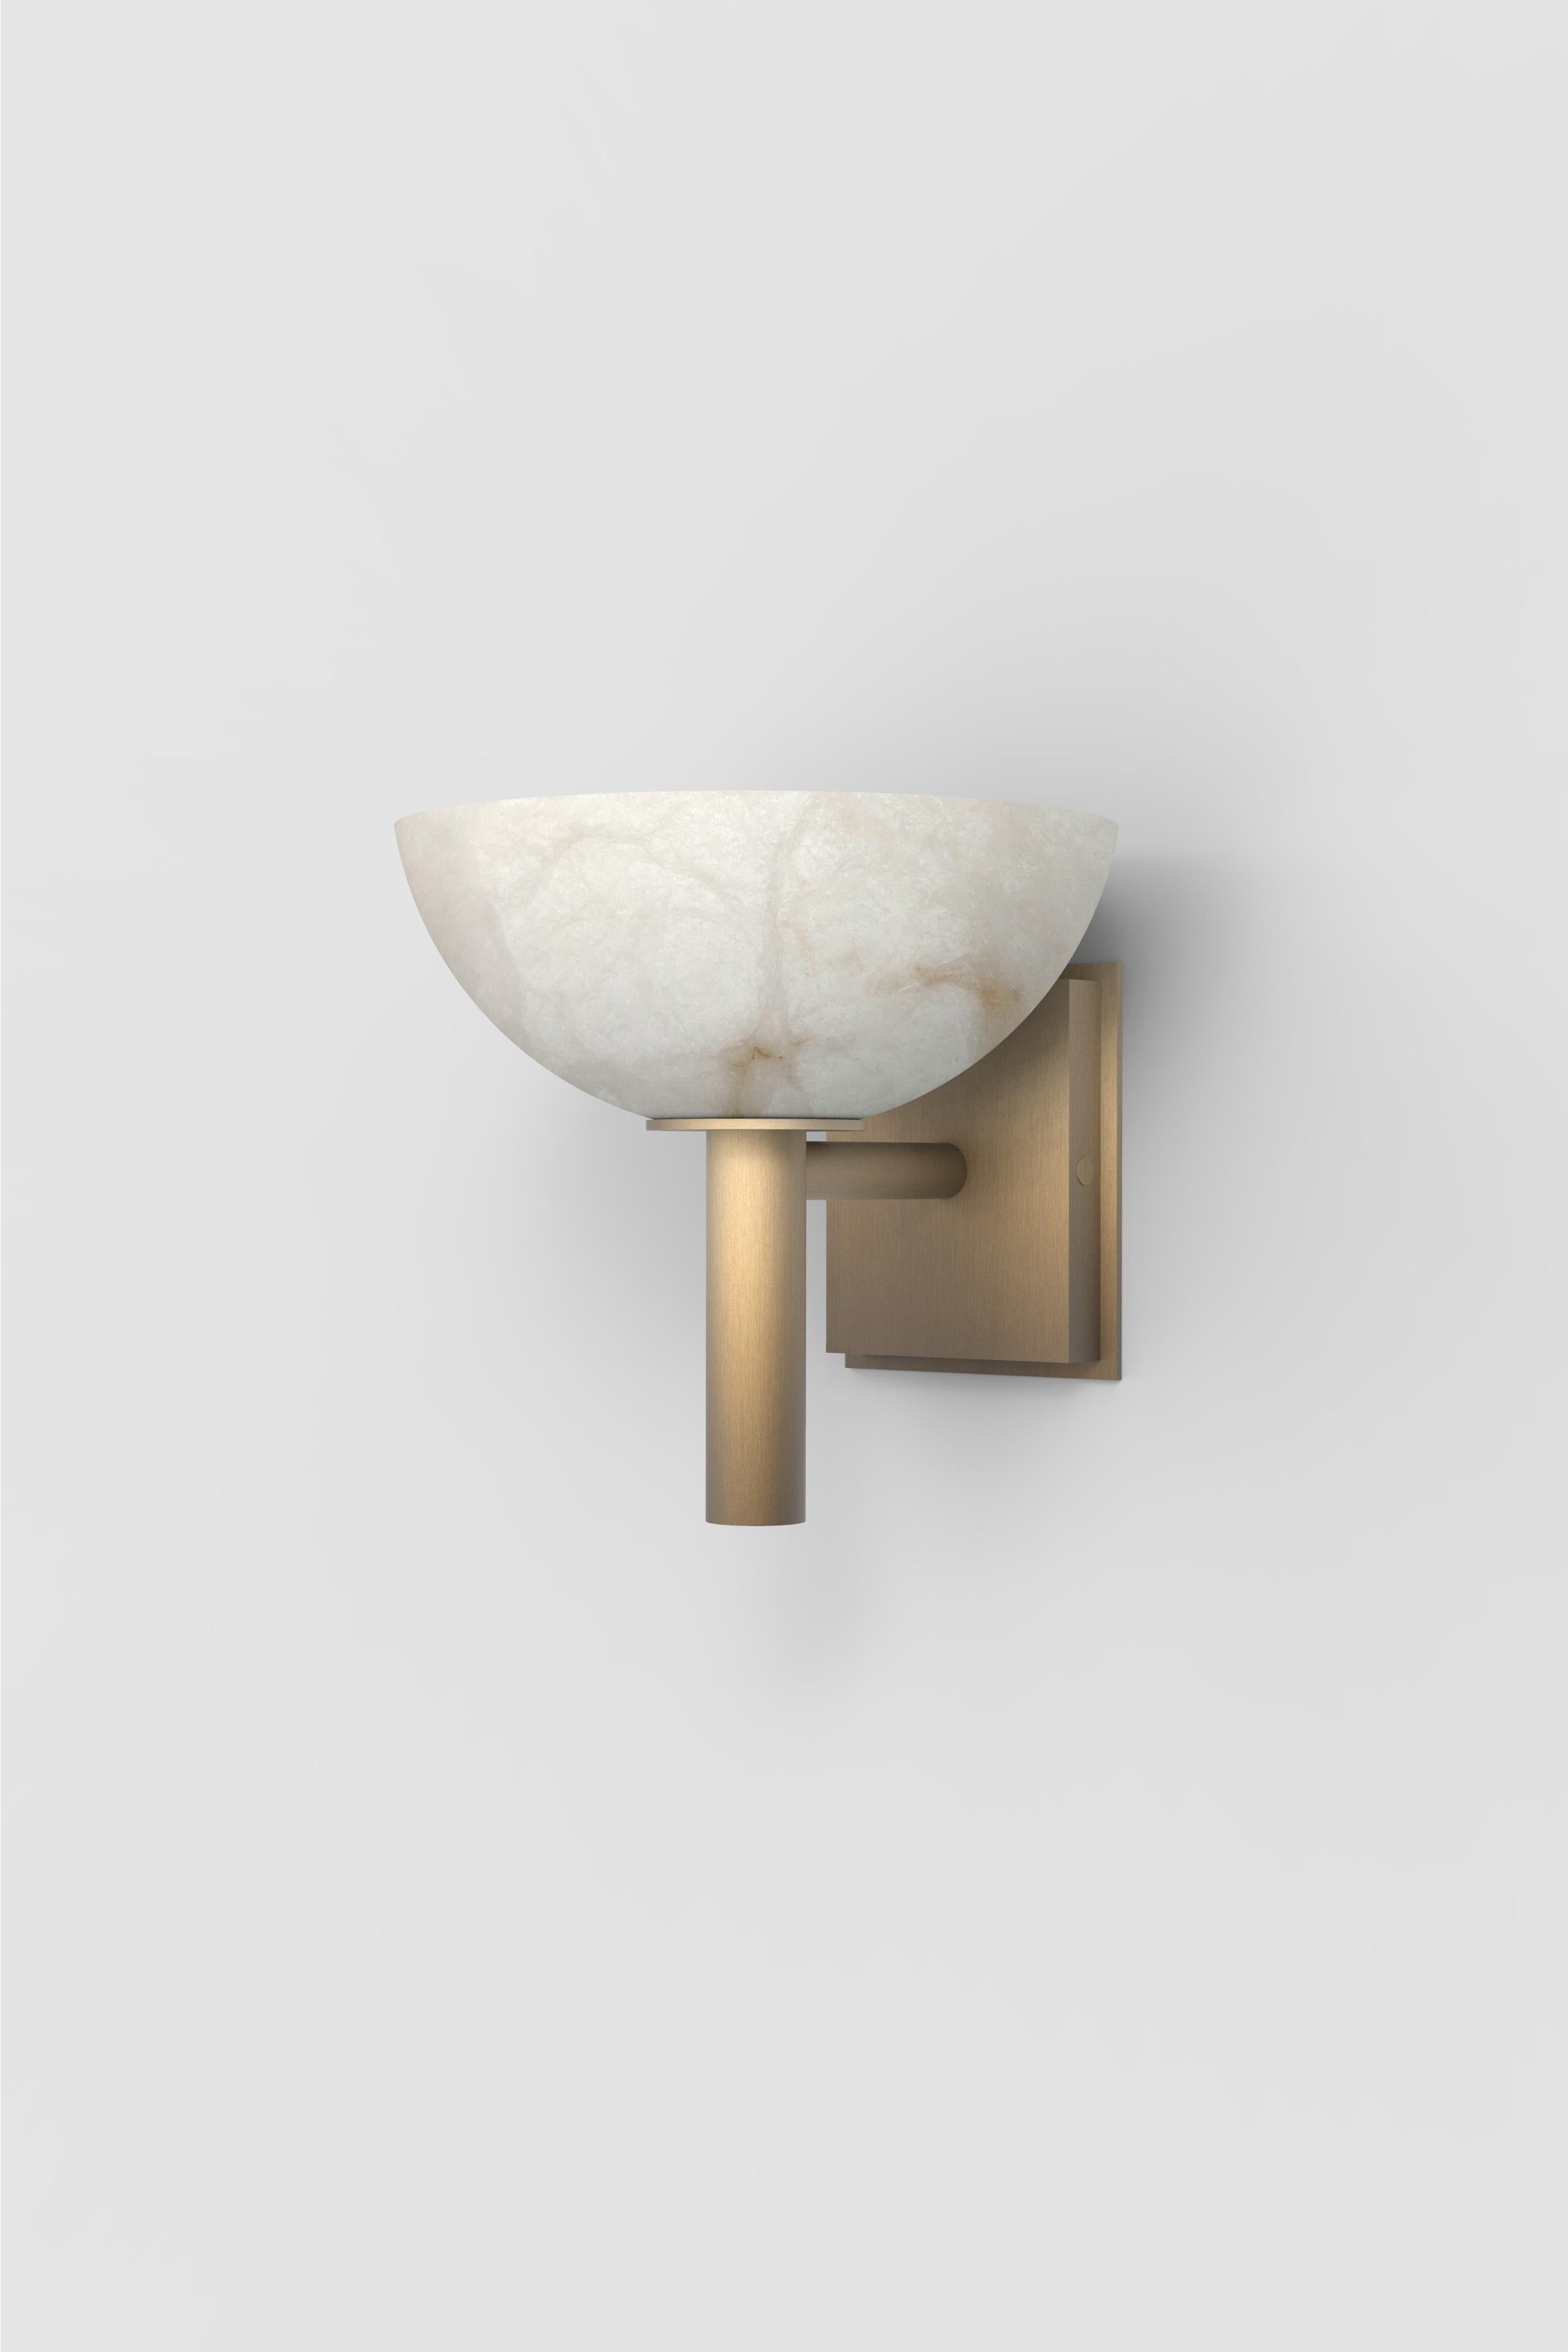 Orphan Work 200A Sconce BB
Shown in alabaster with brushed brass 
Available in brushed brass and blackened brass
Measures: 8.625” height x 9.75” depth x 9.5